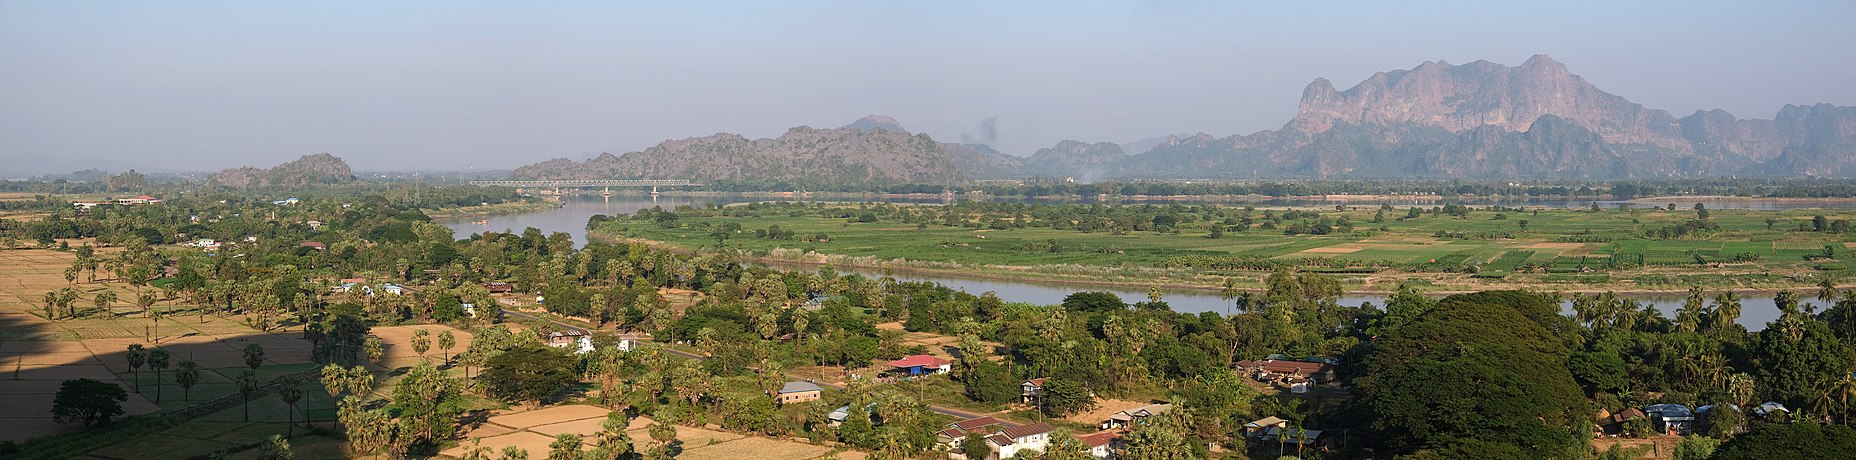 Salween River in Hpa-An